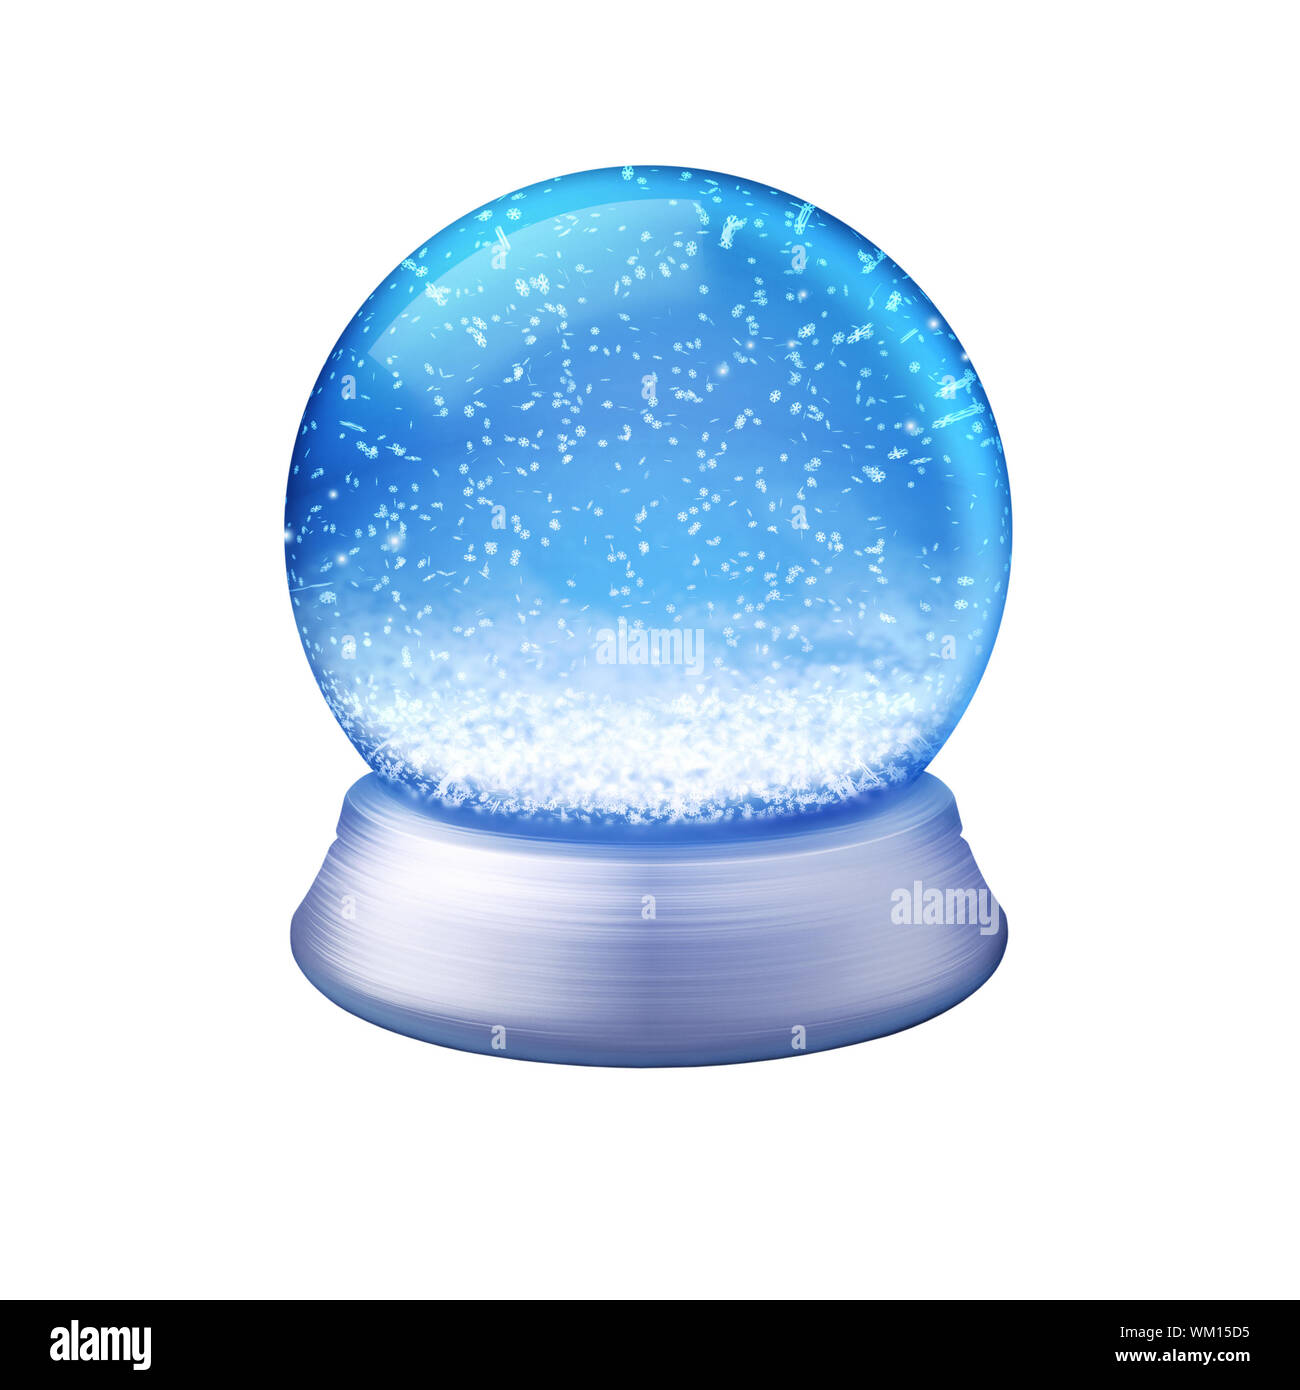 Realistic illustration of an empty snowglobe on white background with path Stock Photo